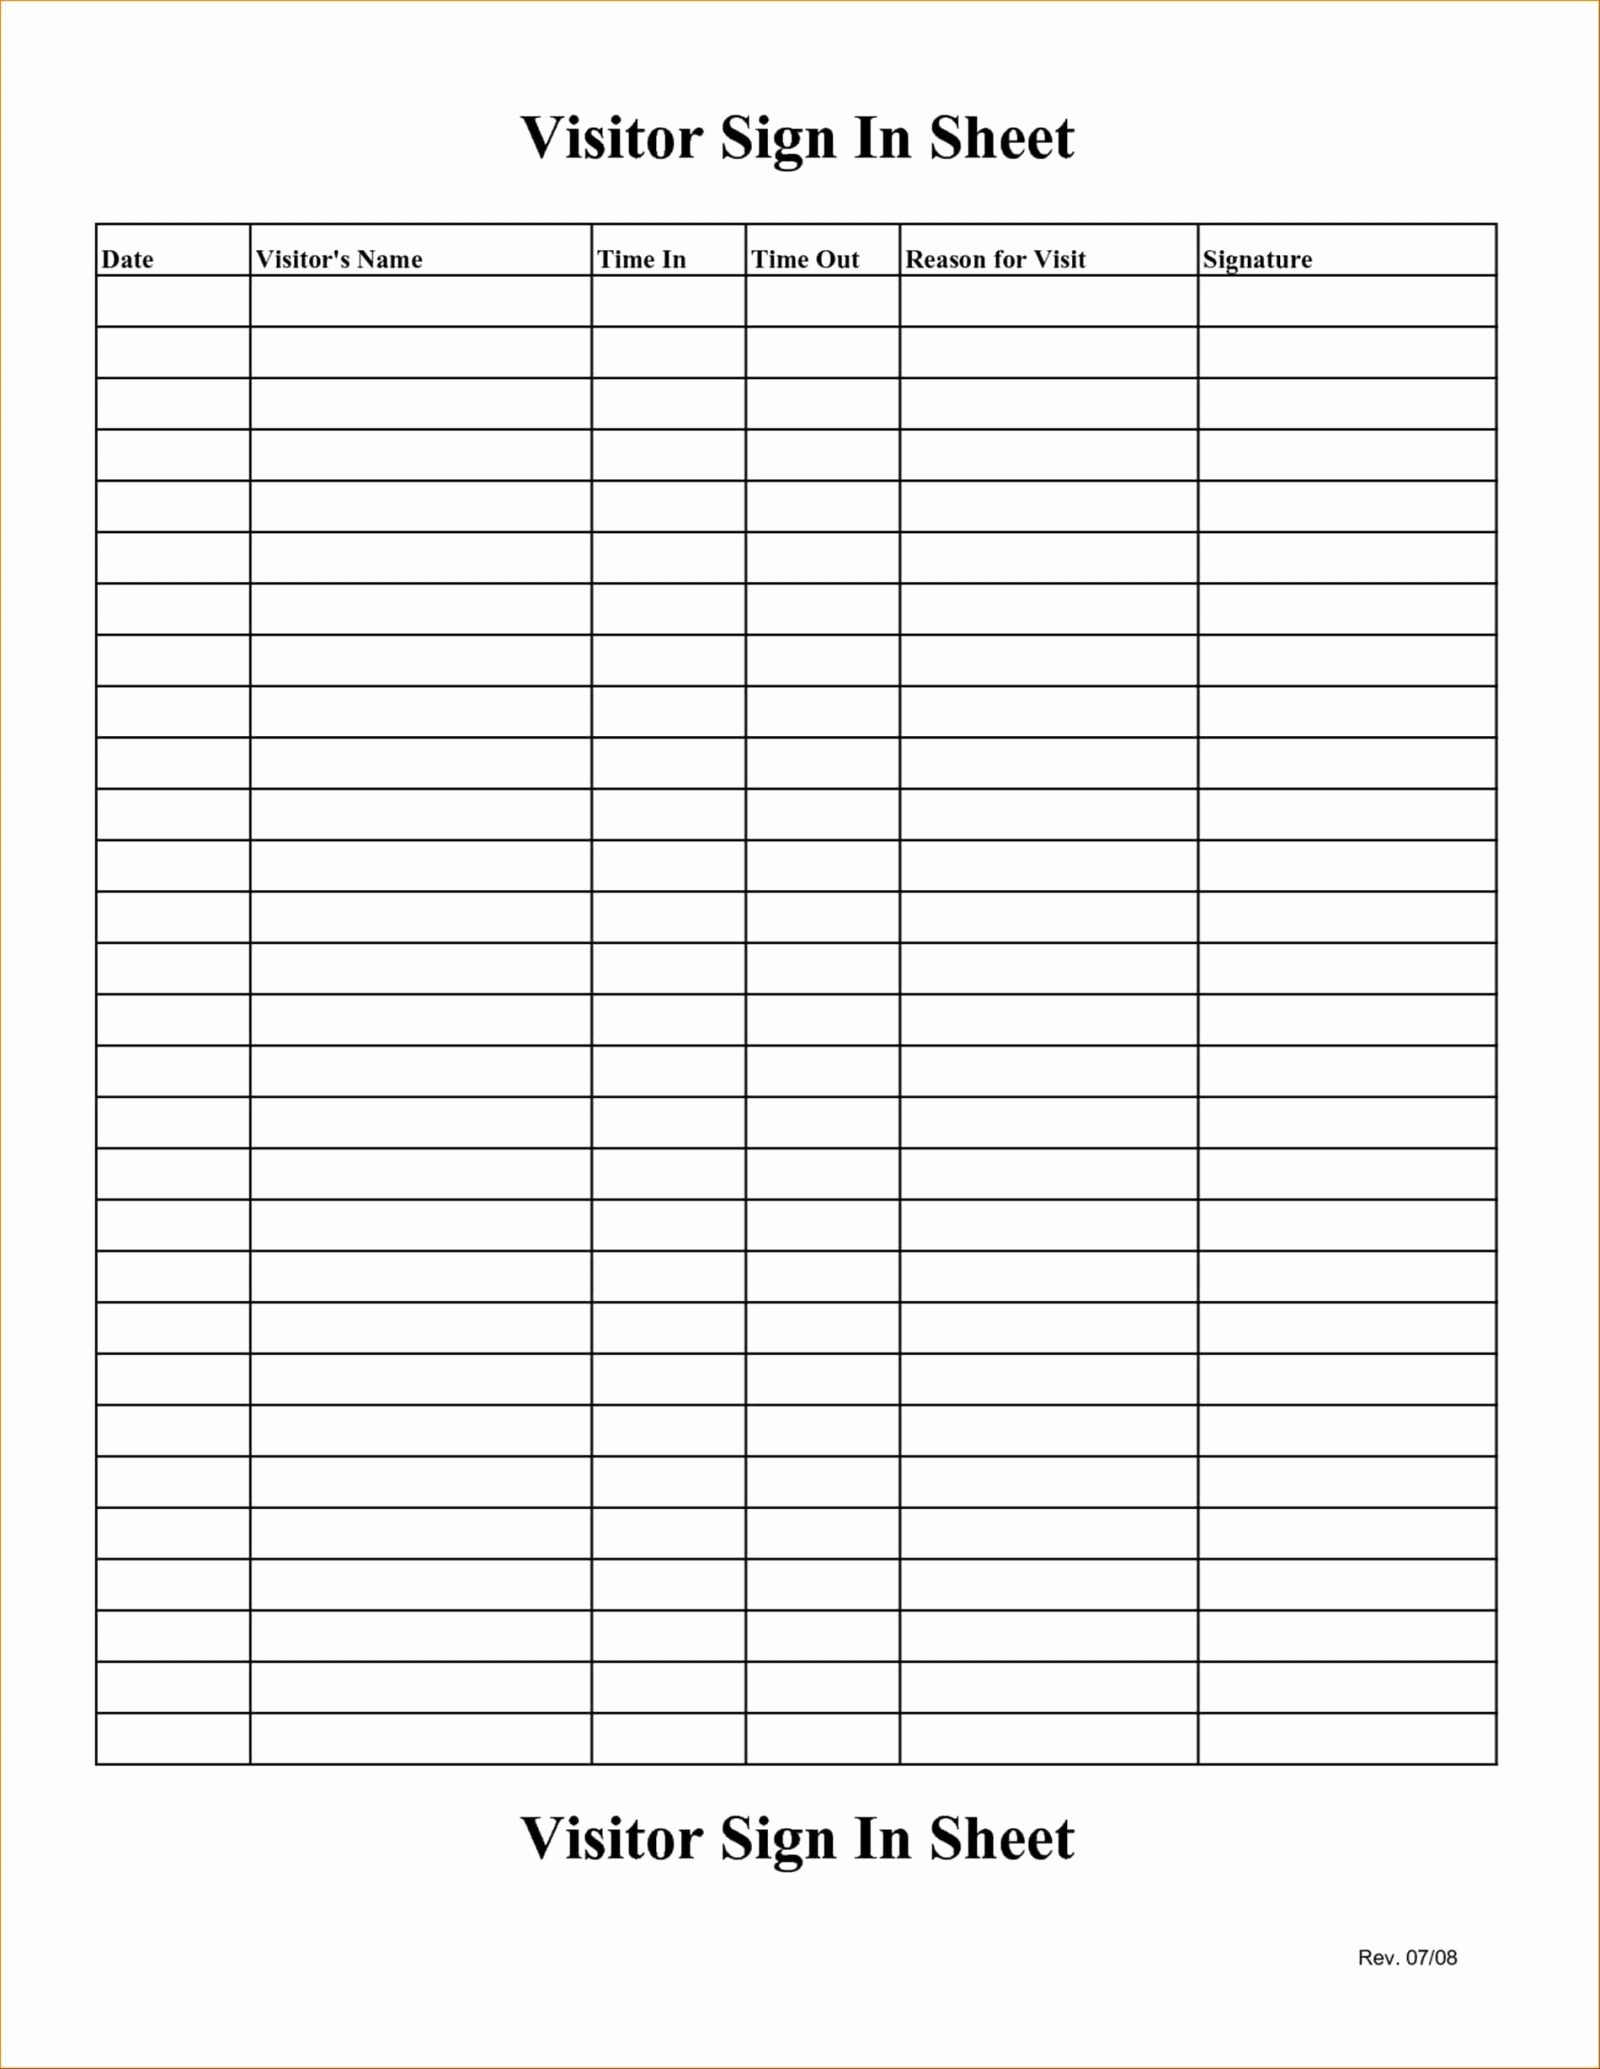 Board Meeting Sign In Sheet Inspirational Customized Sign In Sample Sheet Example Sheets for